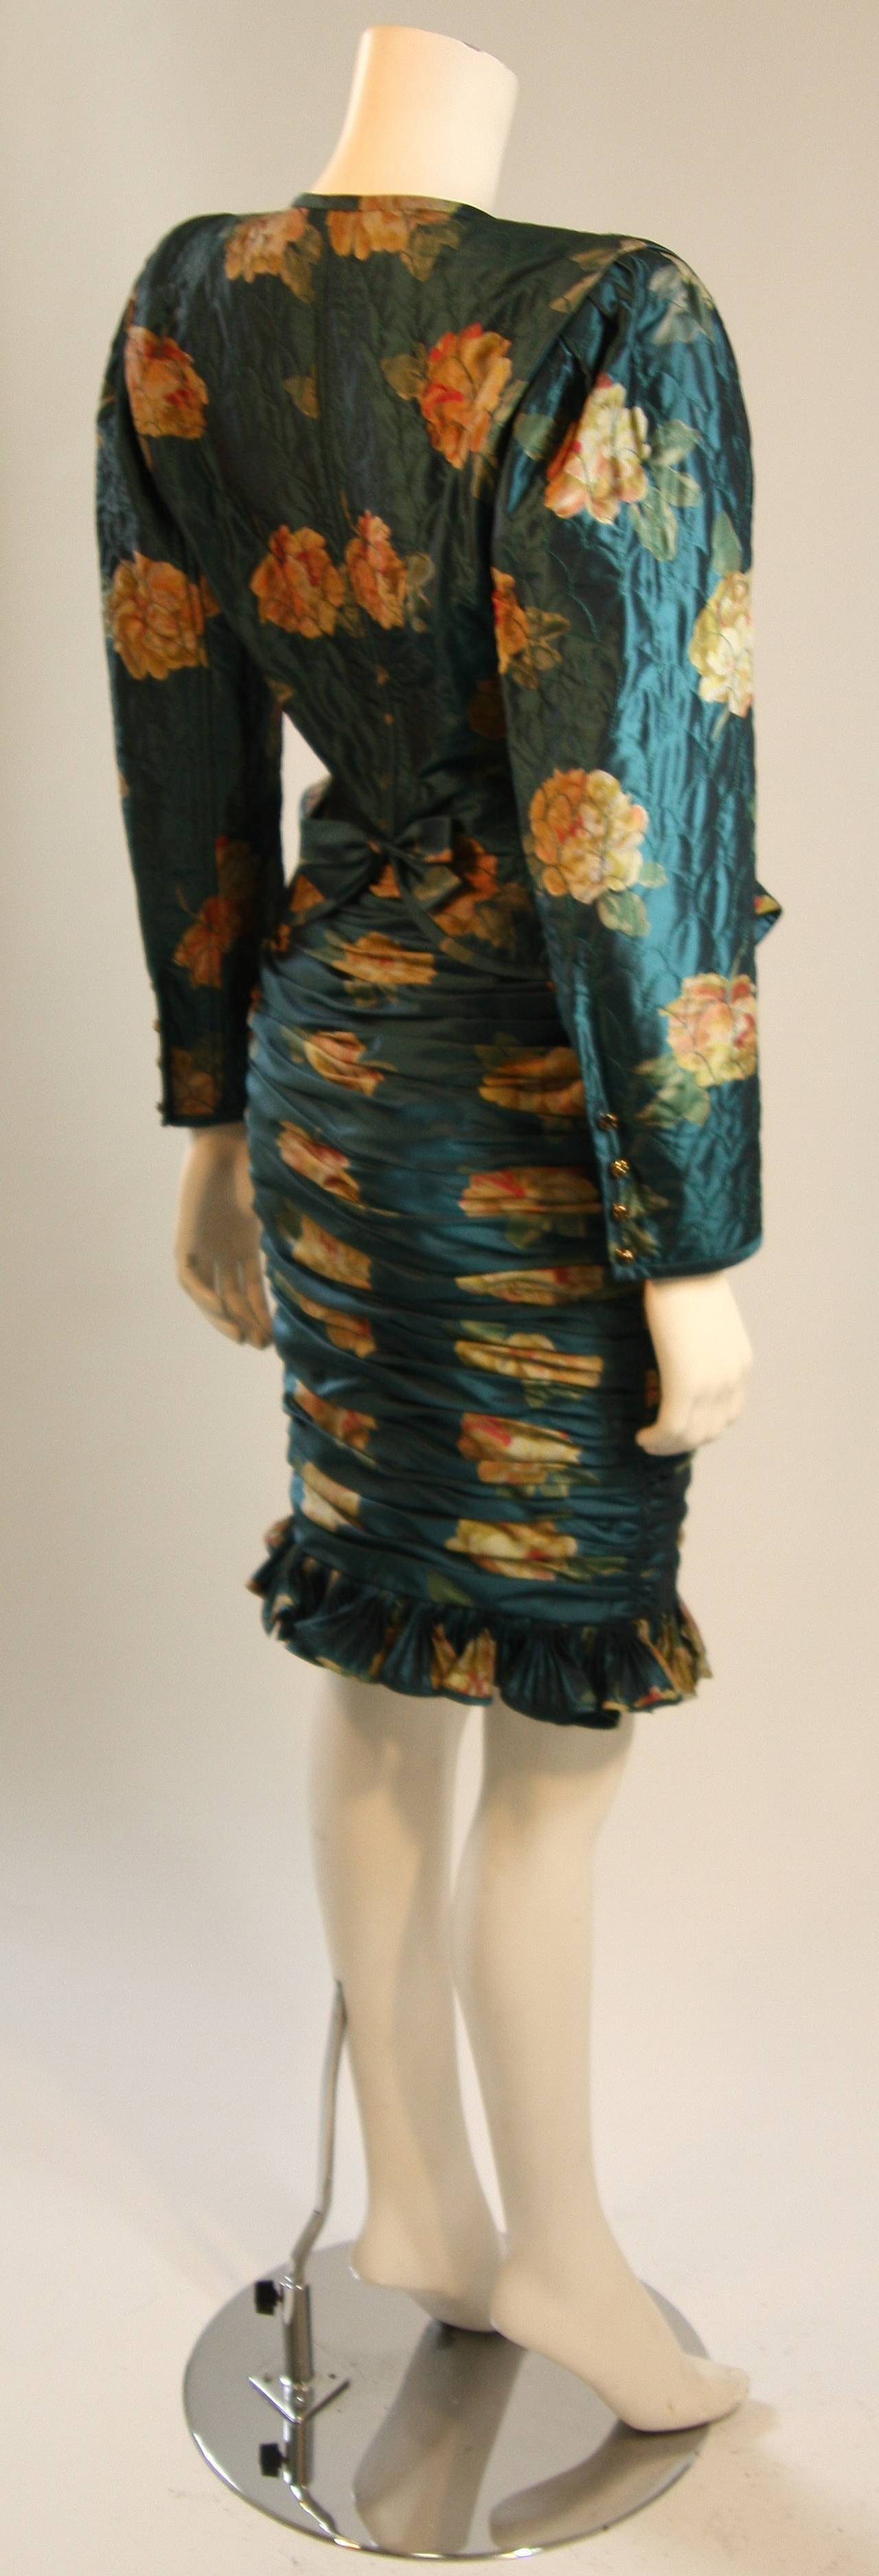 Emanuel Ungaro Teal Floral Skirt Suit with Peplum and Rouching Size 6 In Excellent Condition For Sale In Los Angeles, CA